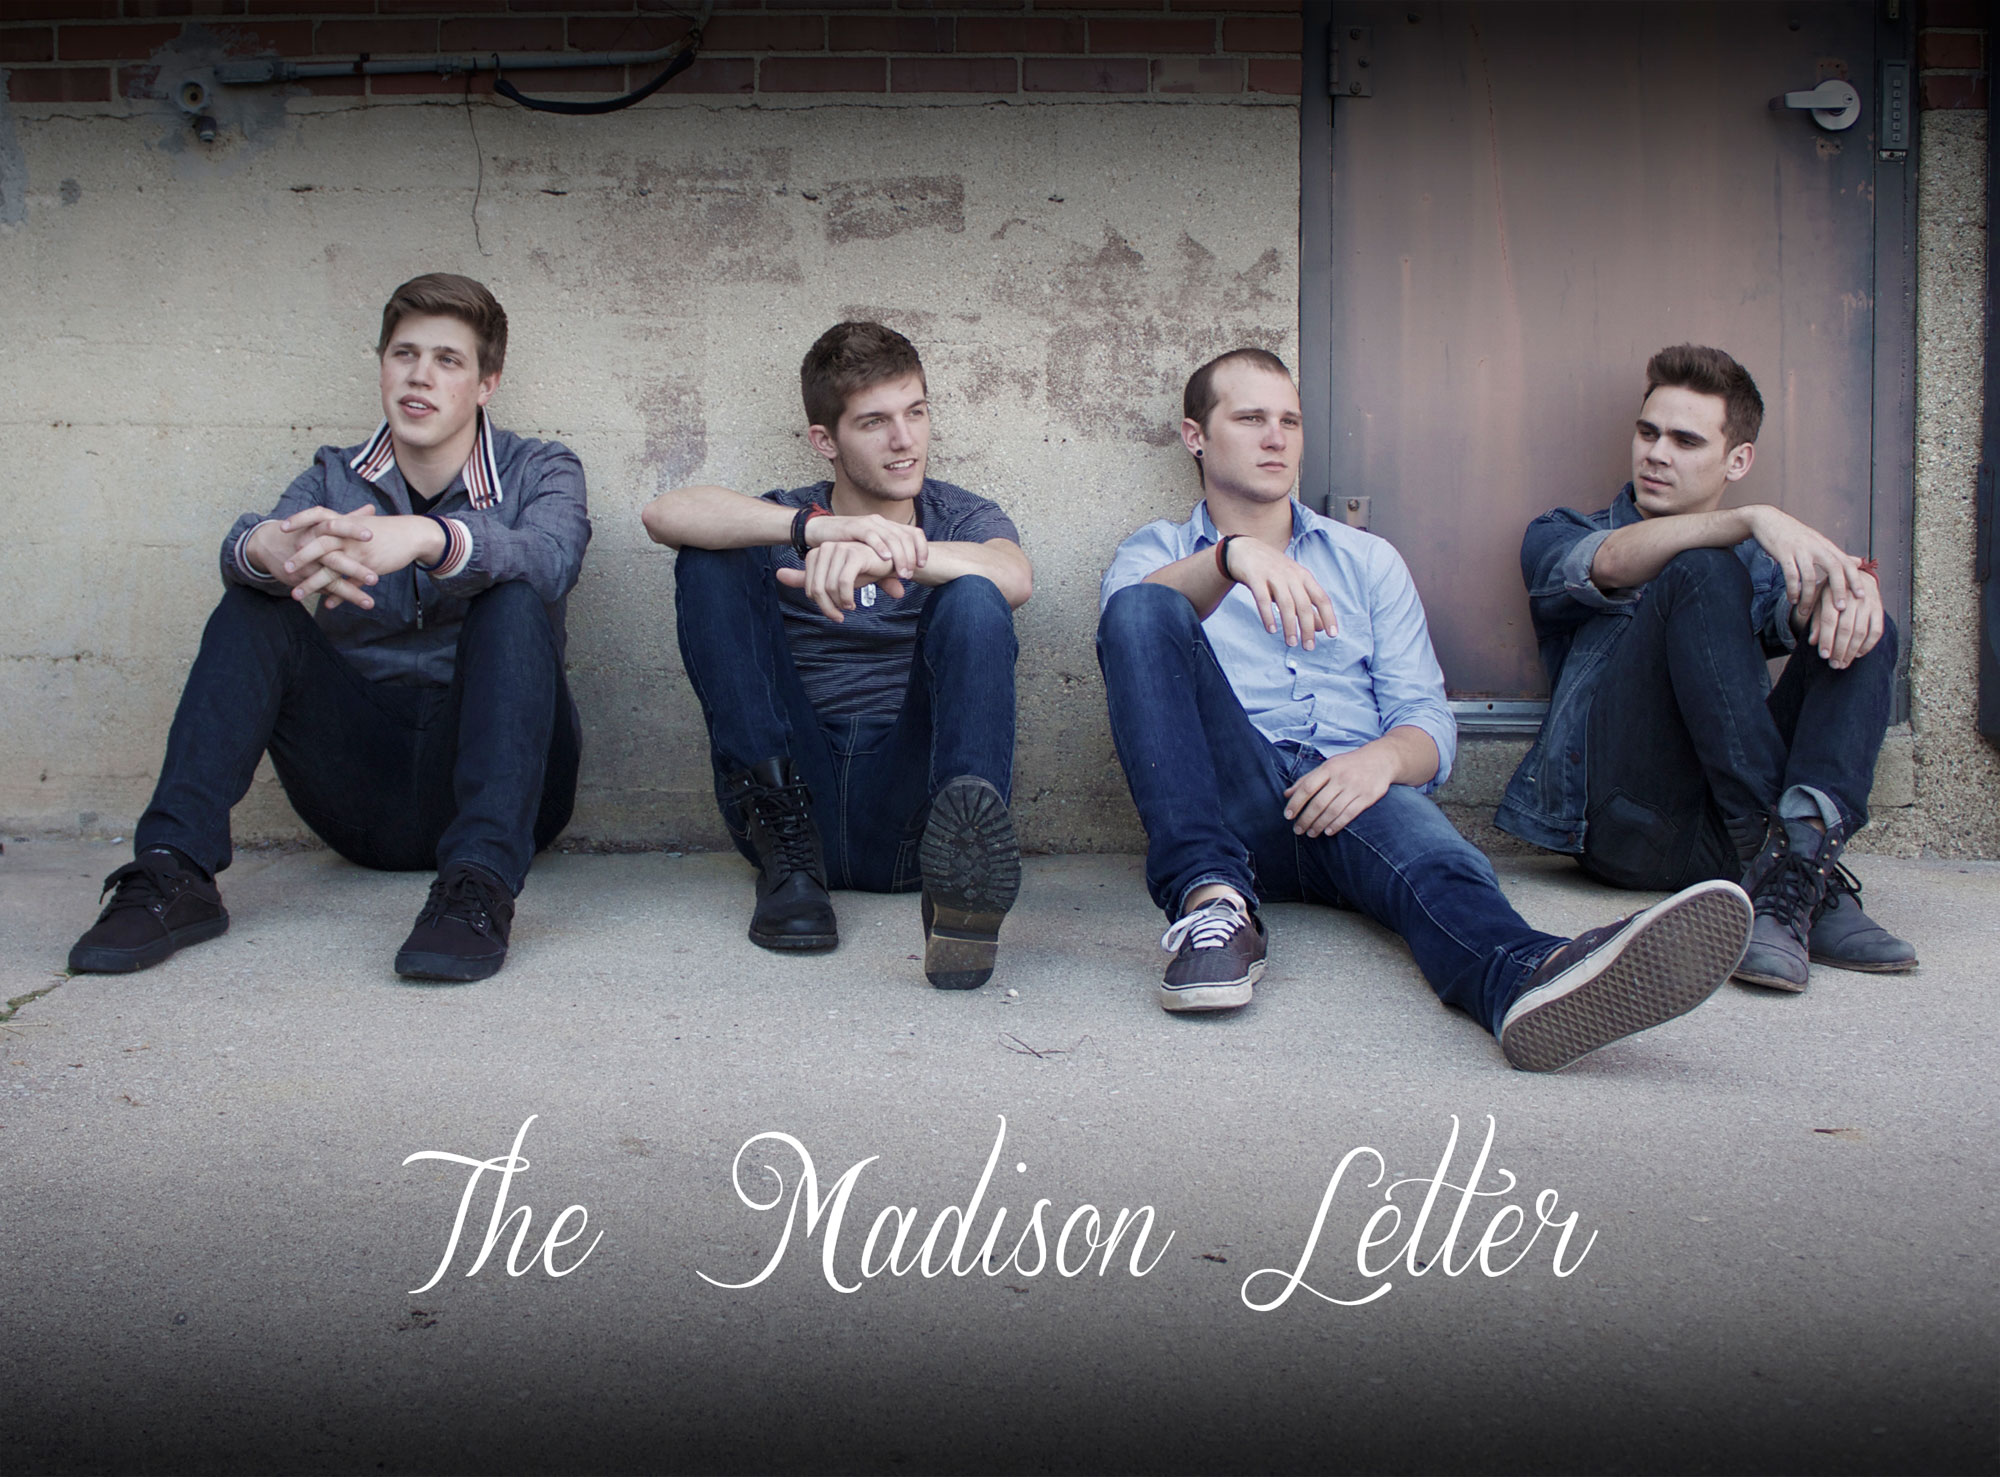 The Madison Letter Nominated for mtvU Woodie Award